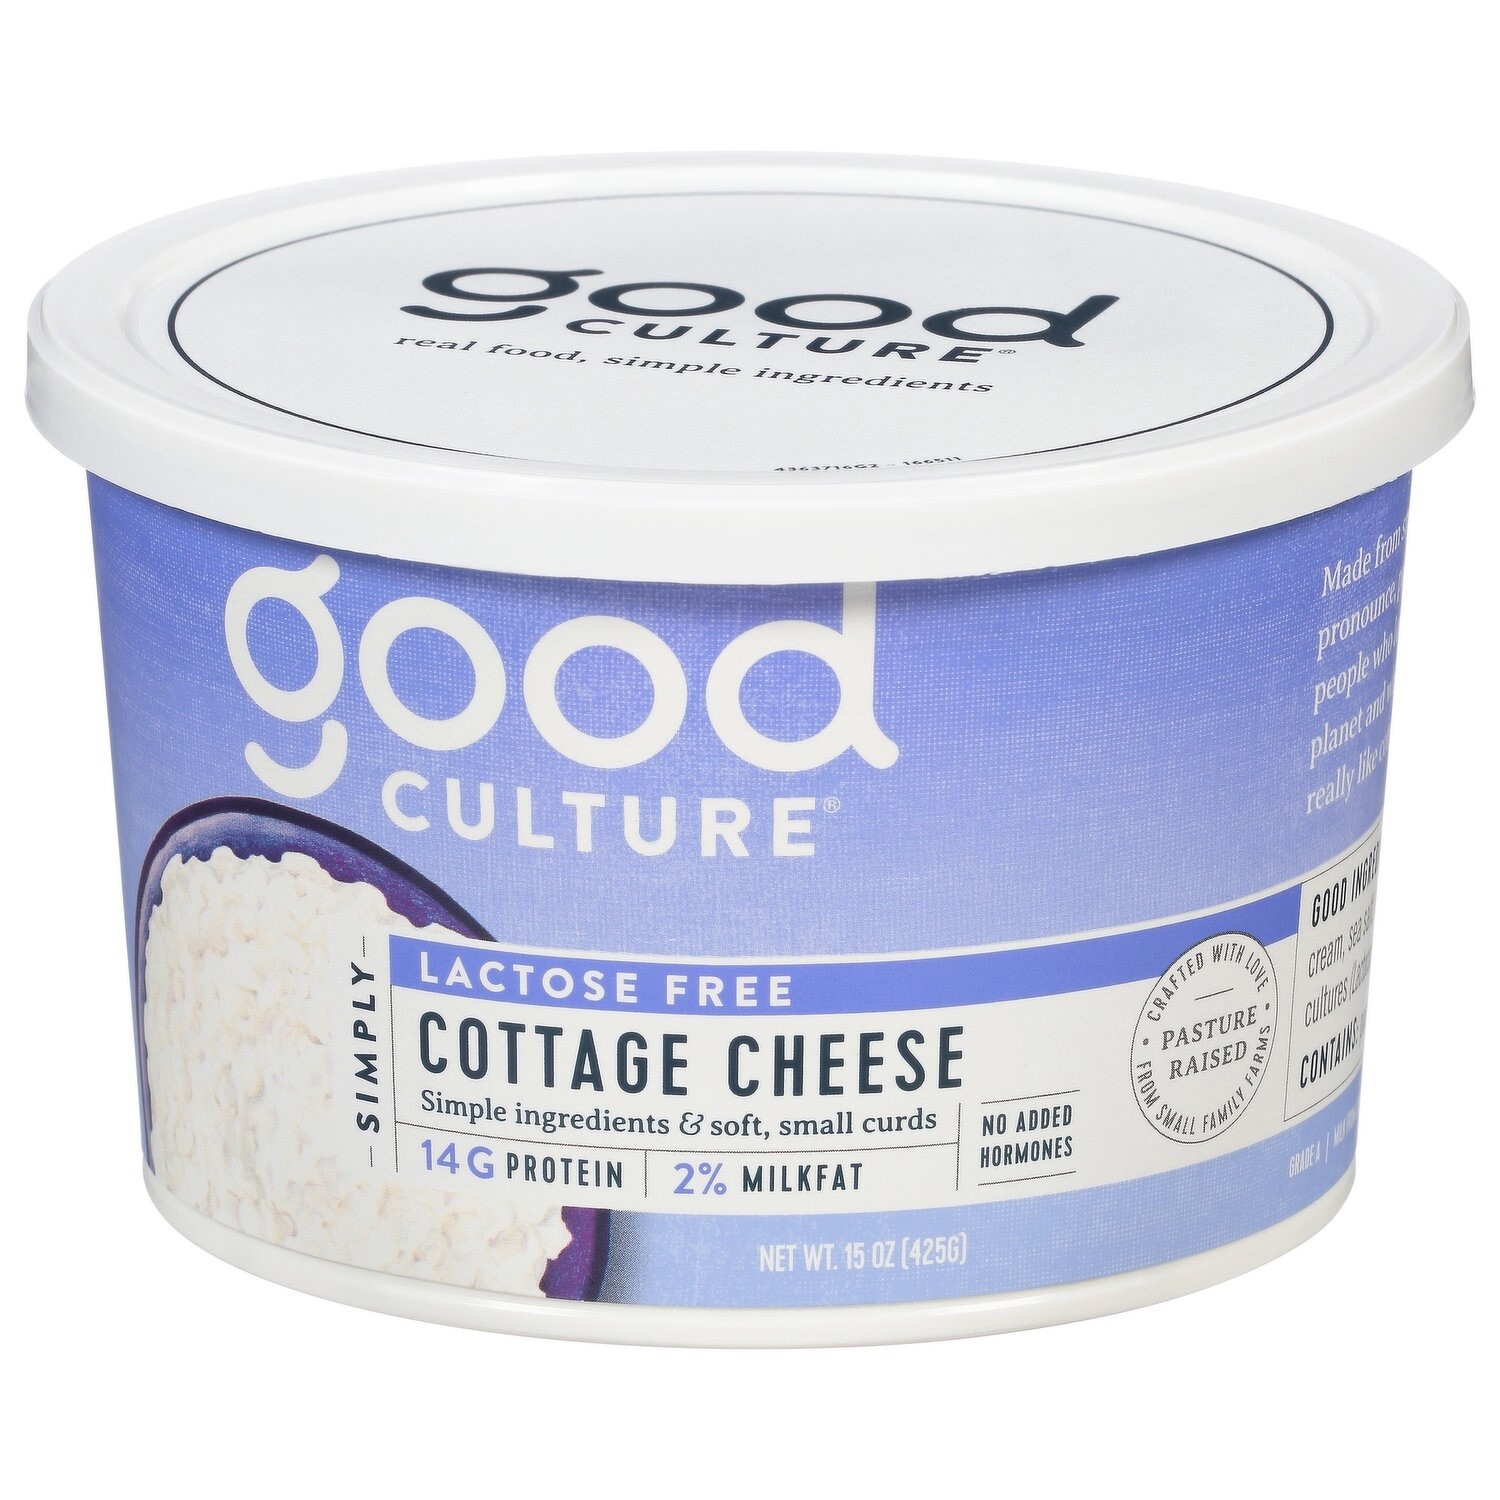 Cottage Cheese (Lactose Free)  - Good Culture - 15 oz